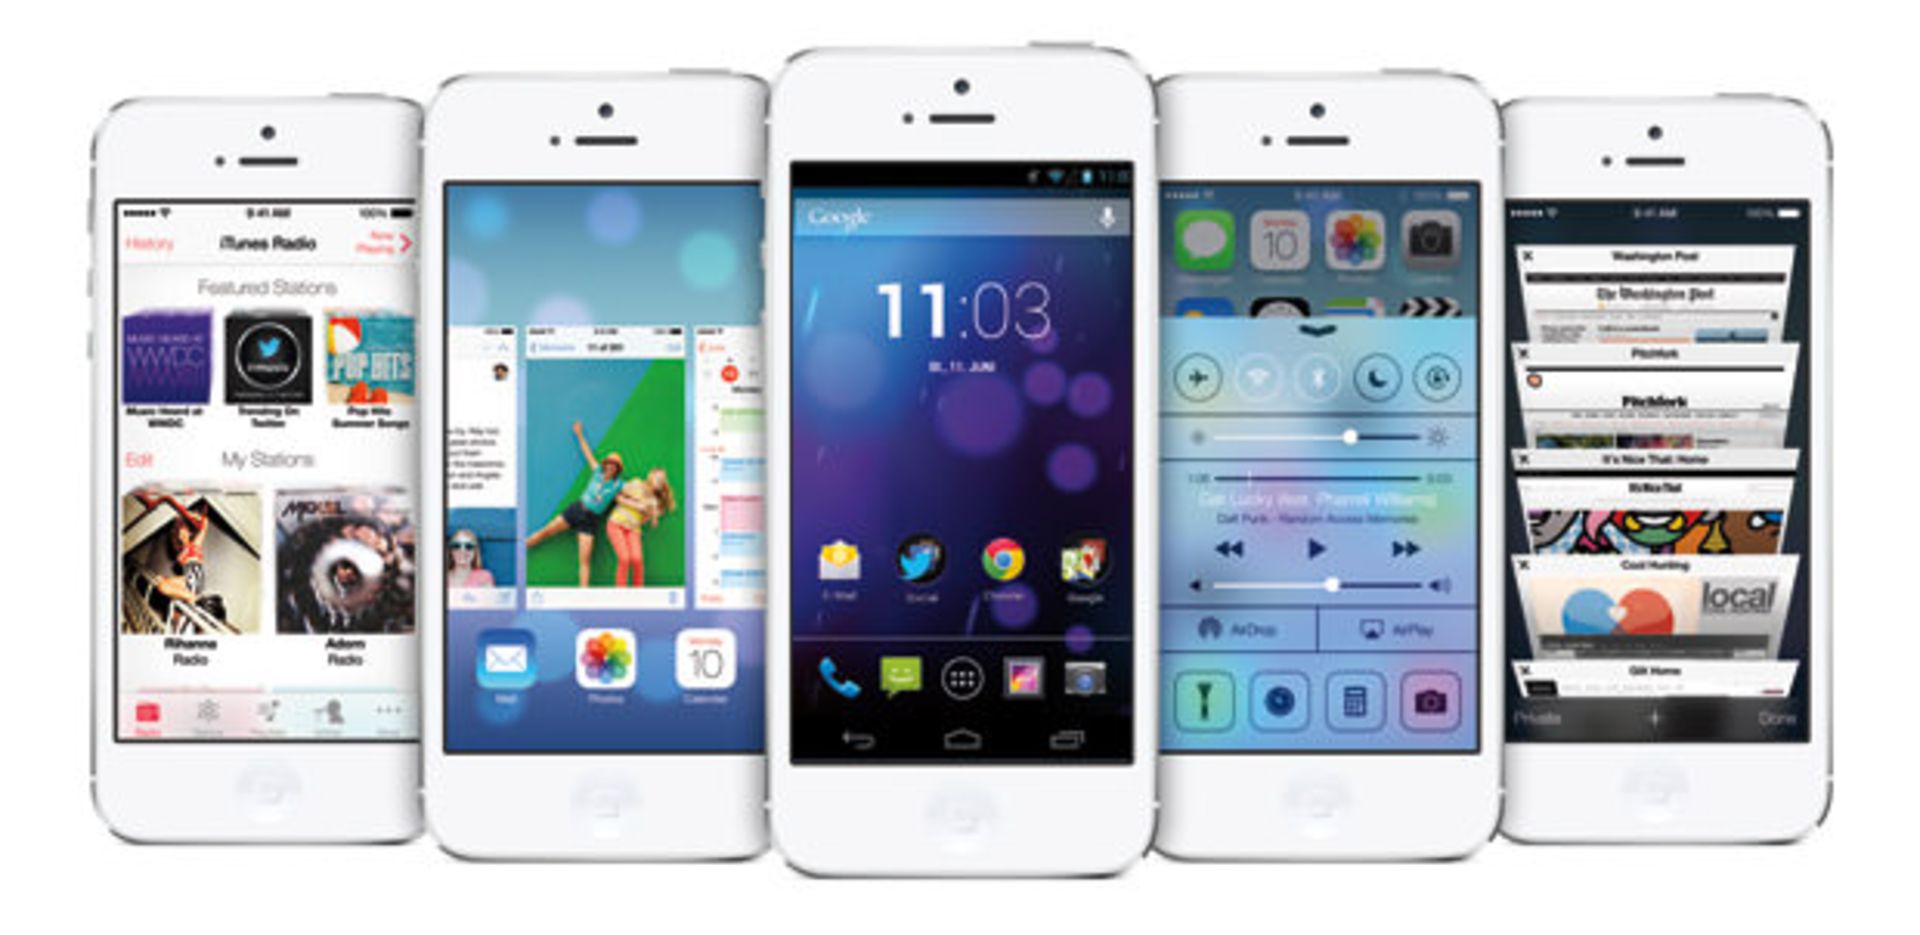 iphone-android-ios7